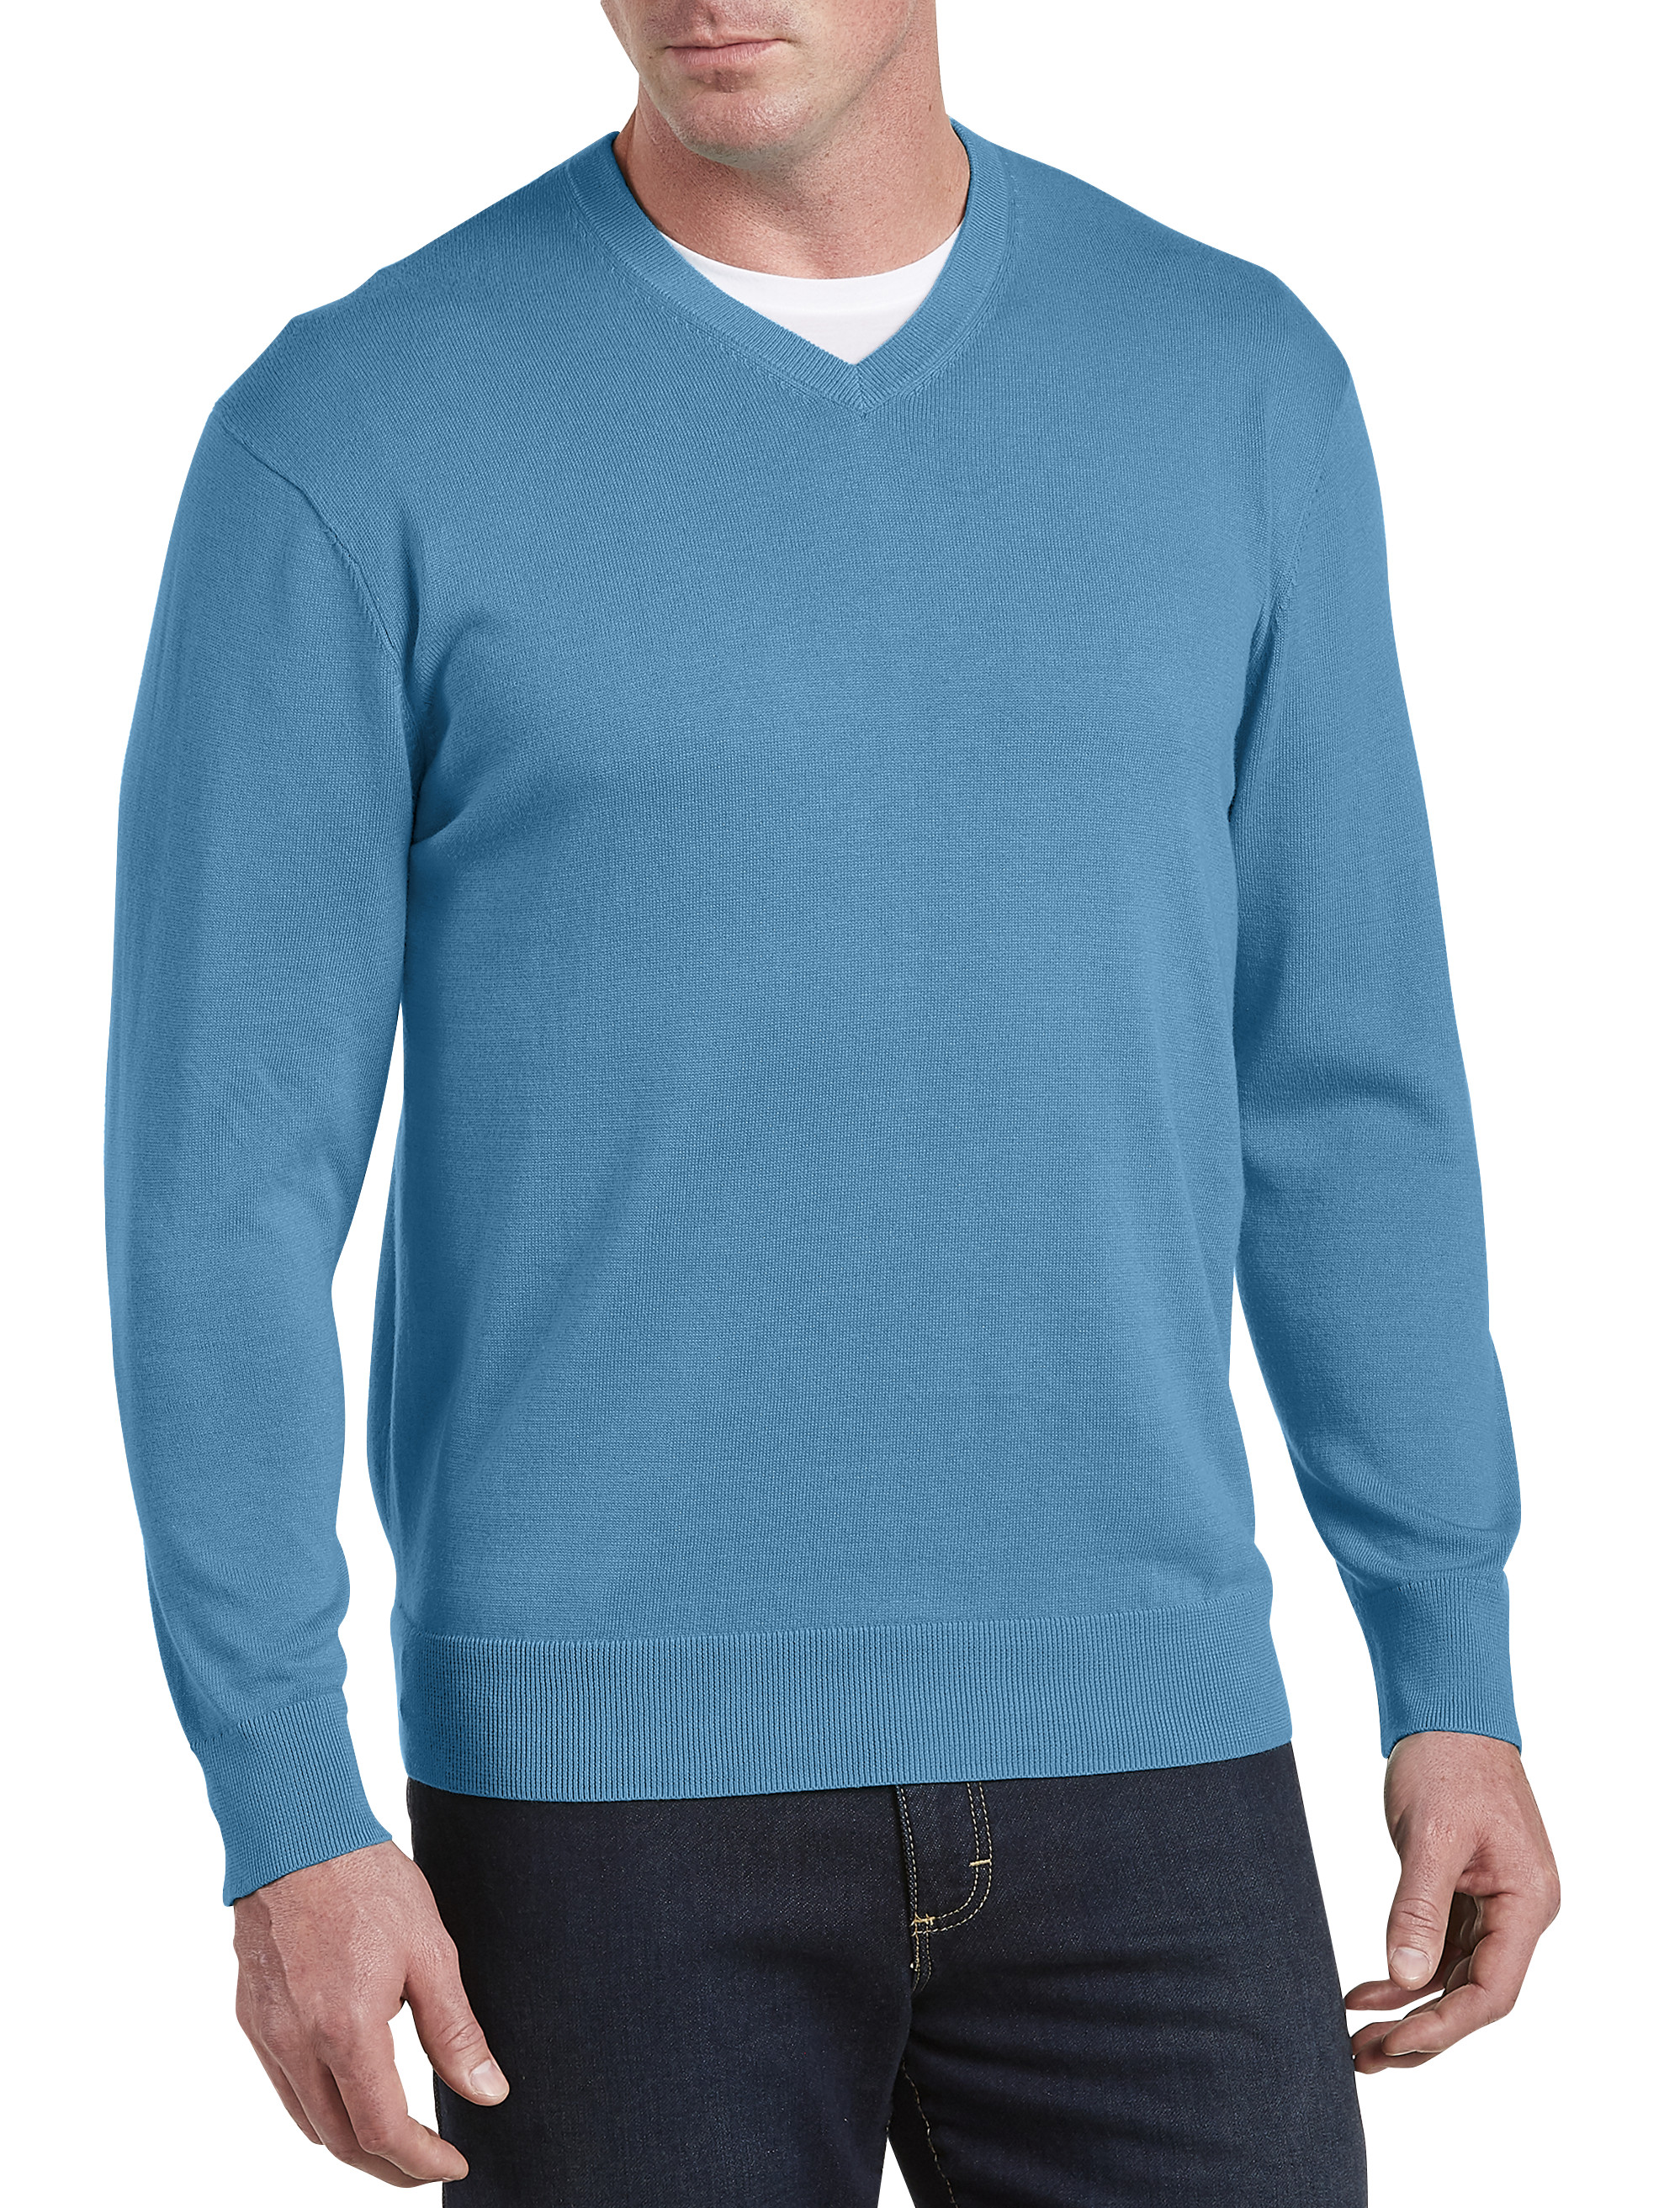 NHL Pullover V-Neck Sweaters